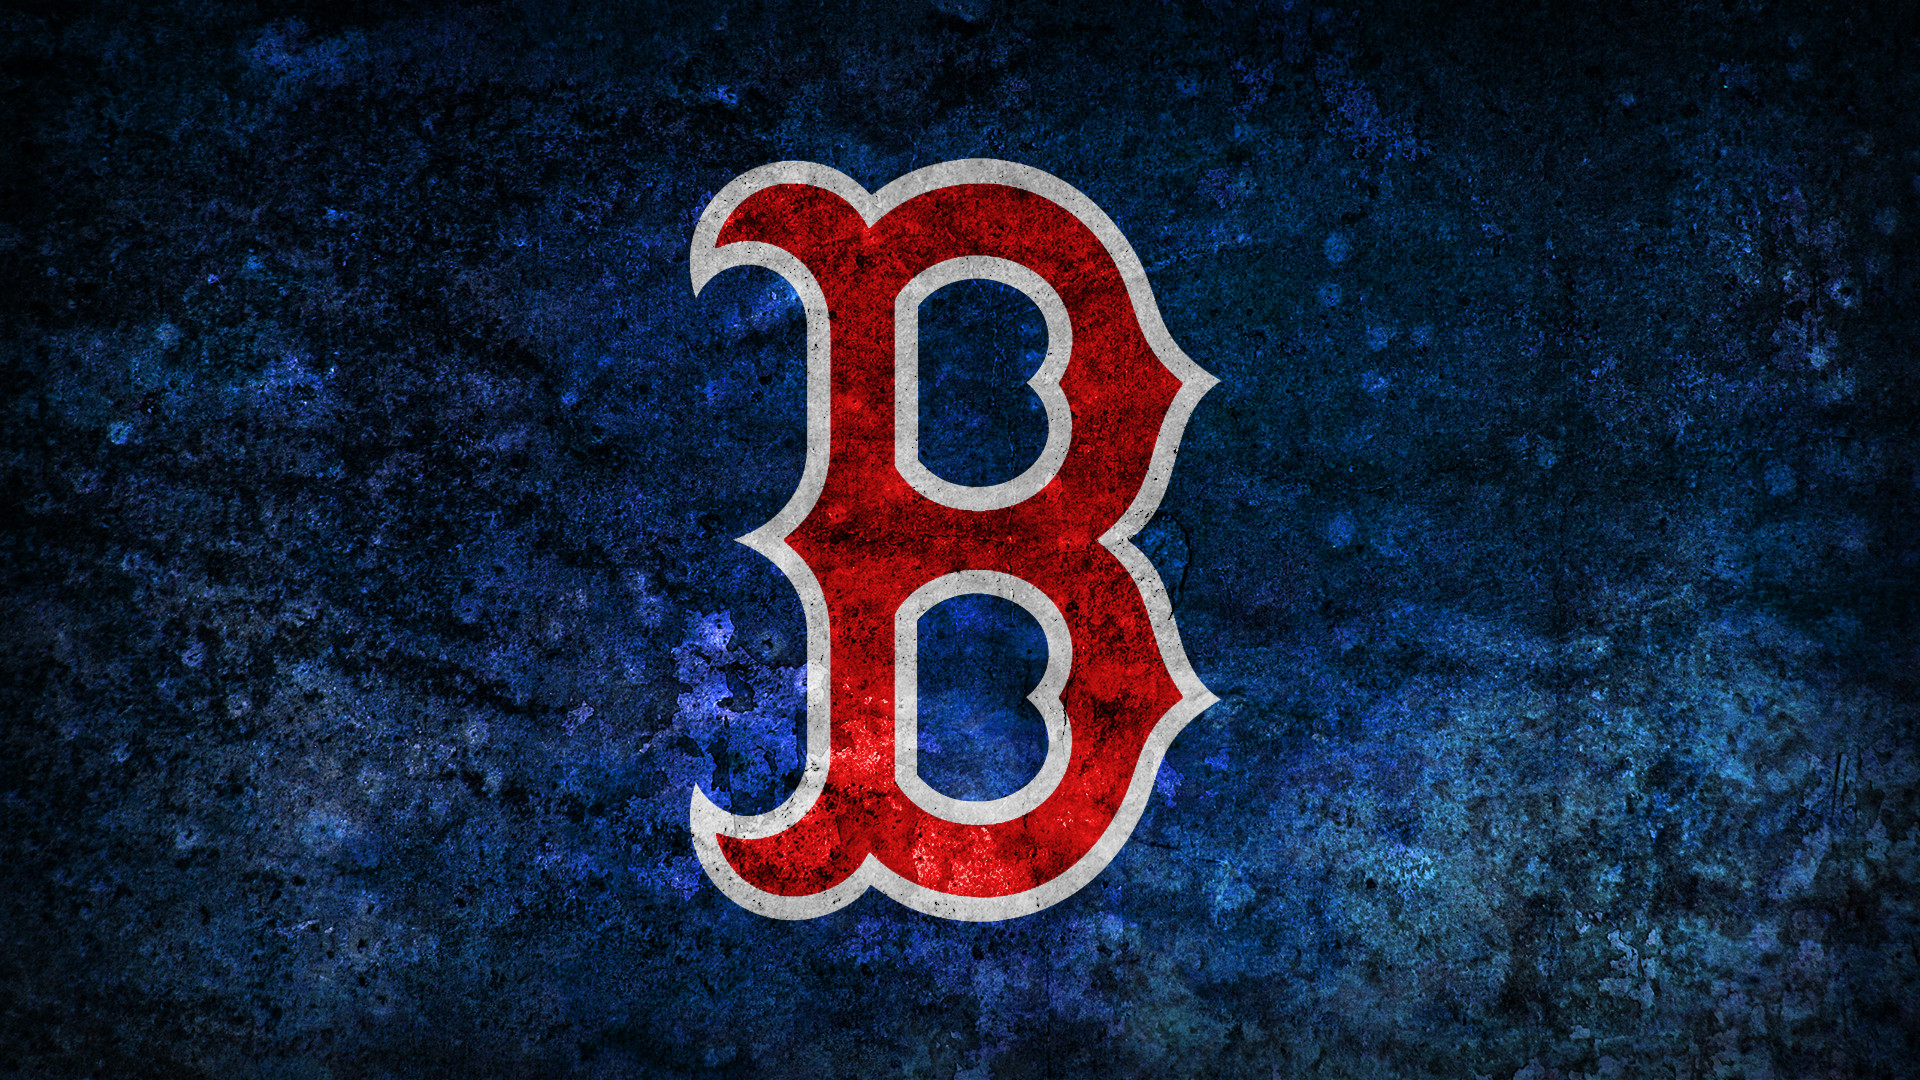 1920x1080 [Image] Some wallpapers I made. Naturally they are Red Sox wallpapers, but  I am willing to make them for all 30 teams if there is enough interest.